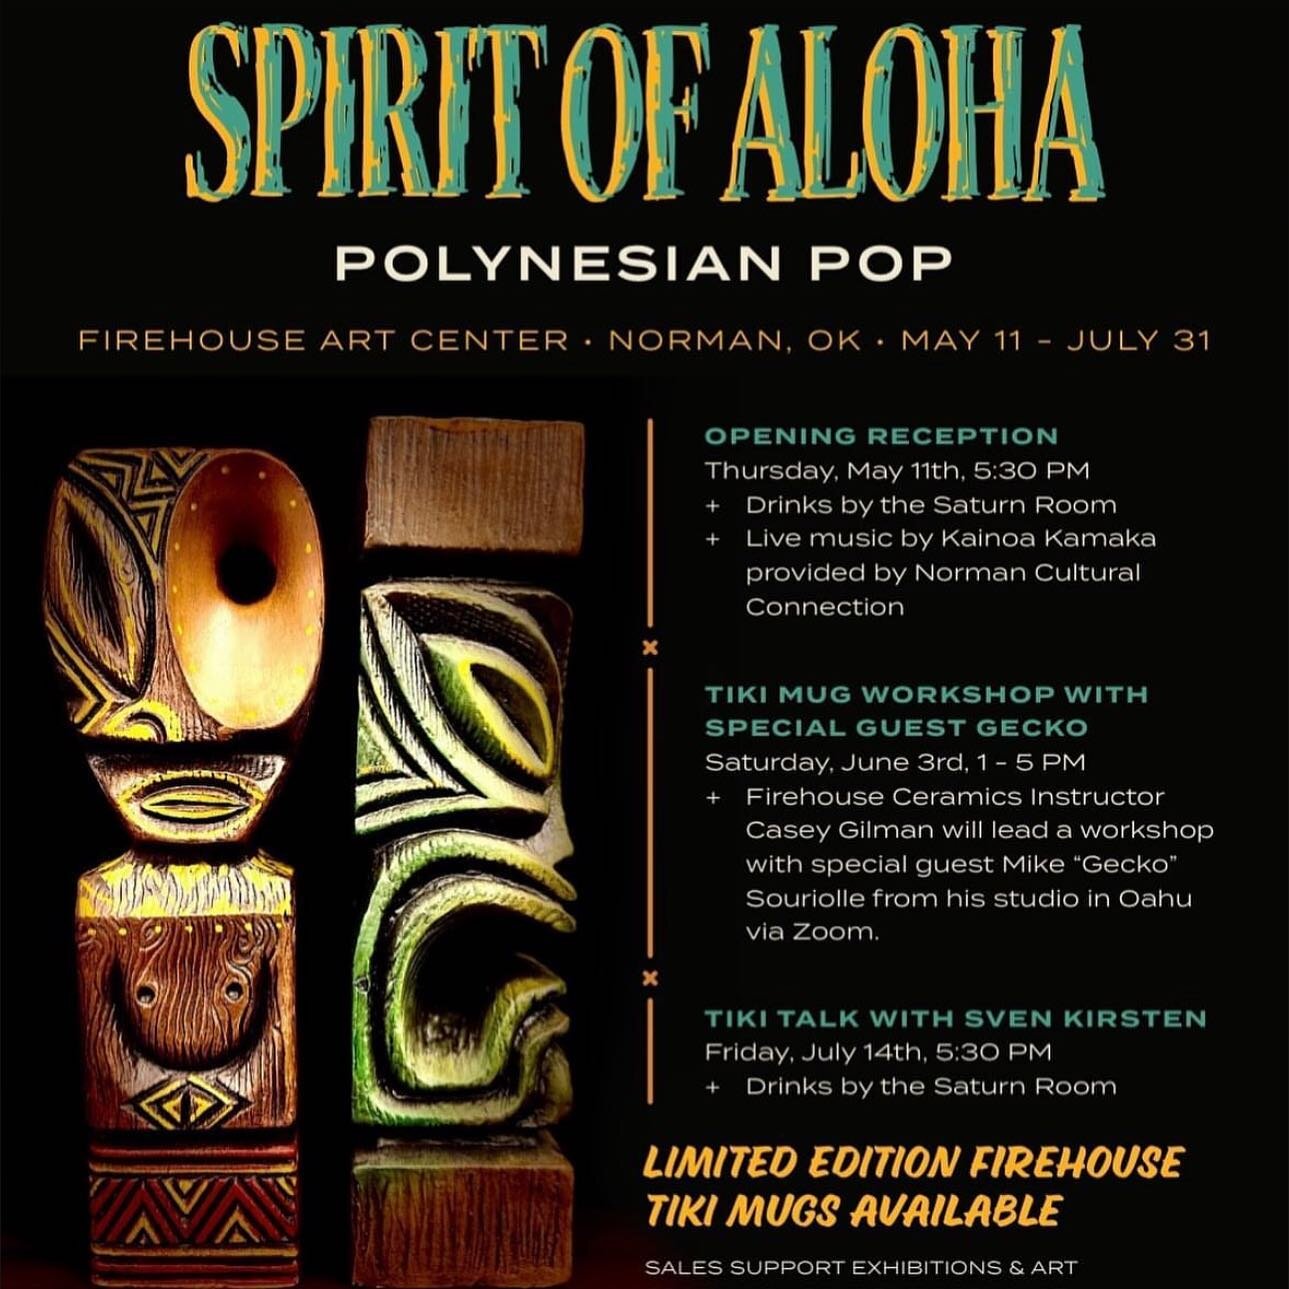 Re-posted from @normanfirehouse 🌴 

Join us at the opening reception of Spirit of Aloha, Thursday, May 11th, at 5:30 PM. The opening reception will feature craft Tiki cocktails by yours truly! As well as Hawaiian-style food provided by Mo&rsquo; Bet